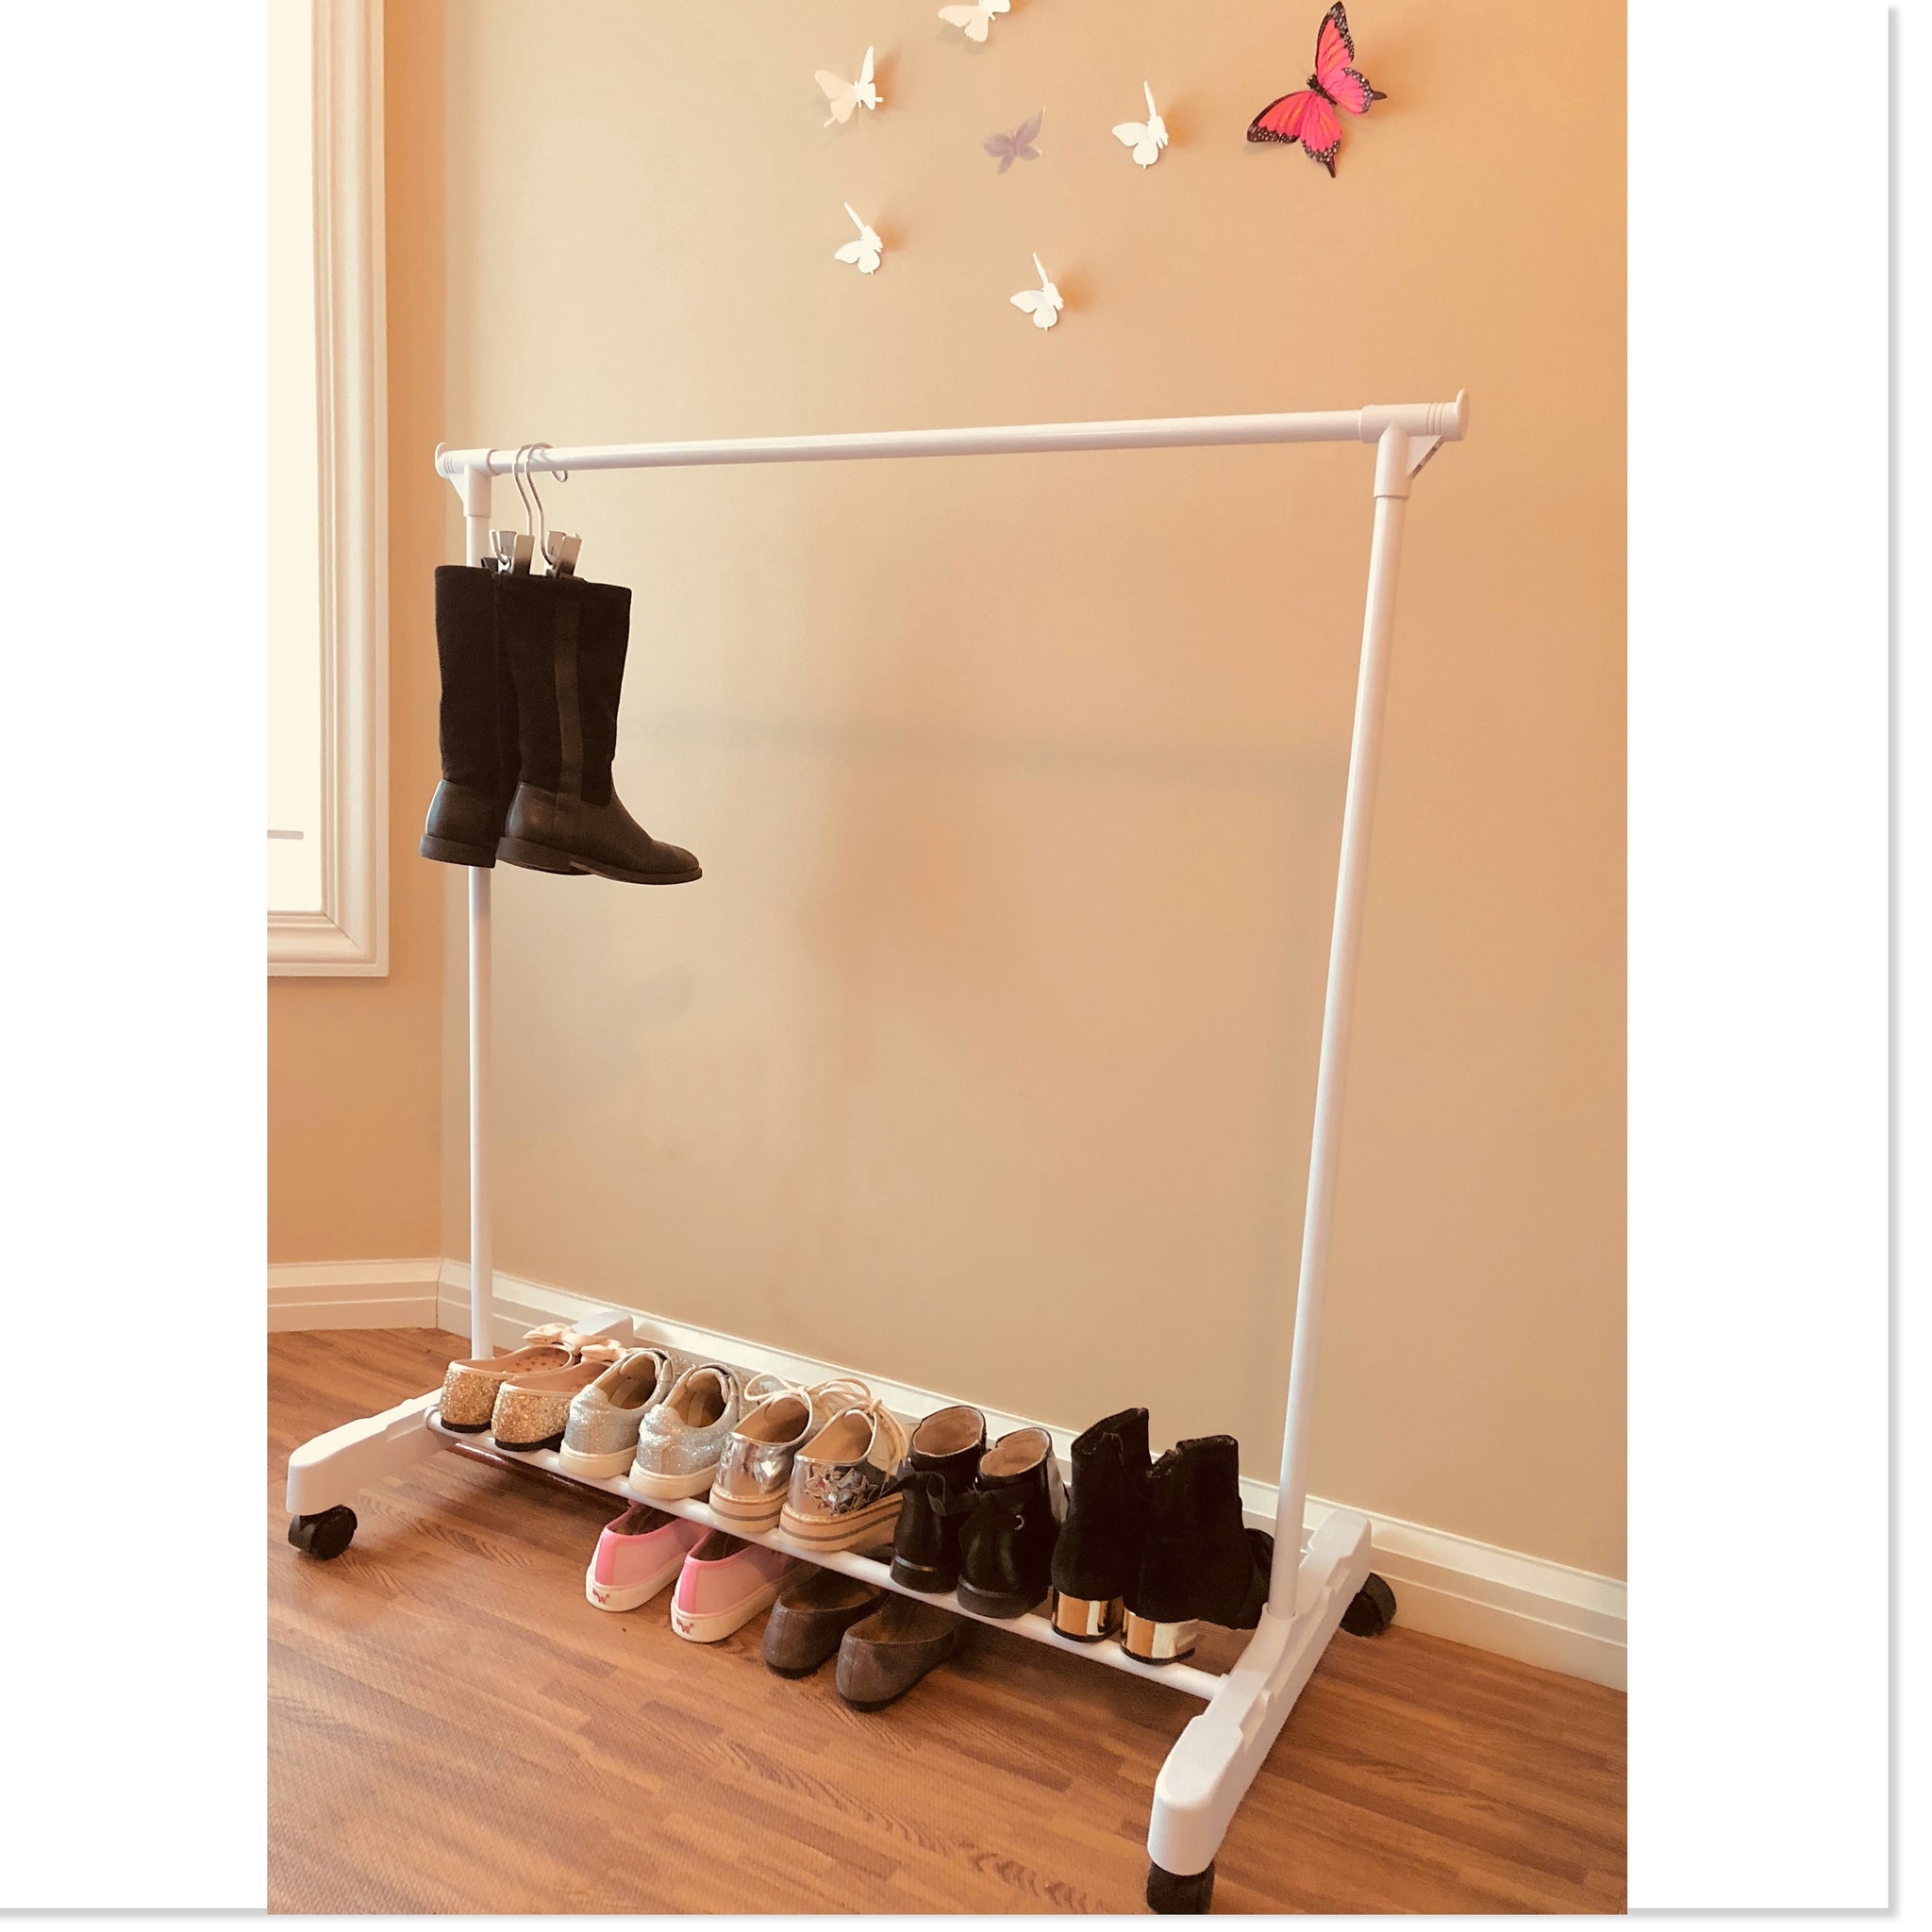 https://boottique.com/cdn/shop/products/New_Child_Garment_Rack_2018_Kids_Clothing_Shoes_and_Boots_Image-_Kids_Garment_Rack_Dress_up_Rack_Childrens_Clothing_Storage-_Square_2048x.jpg?v=1645656183